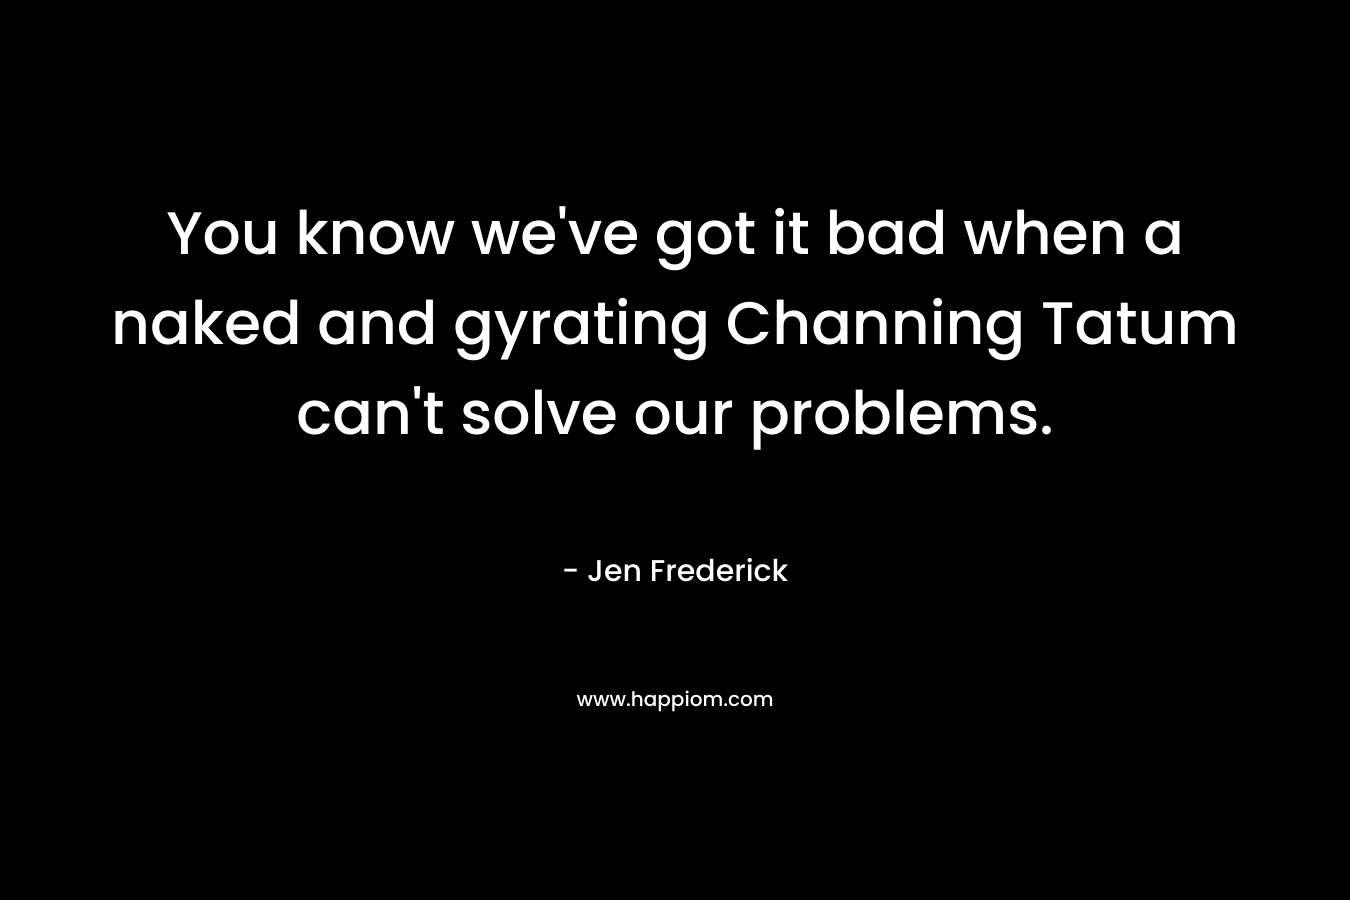 You know we’ve got it bad when a naked and gyrating Channing Tatum can’t solve our problems. – Jen Frederick